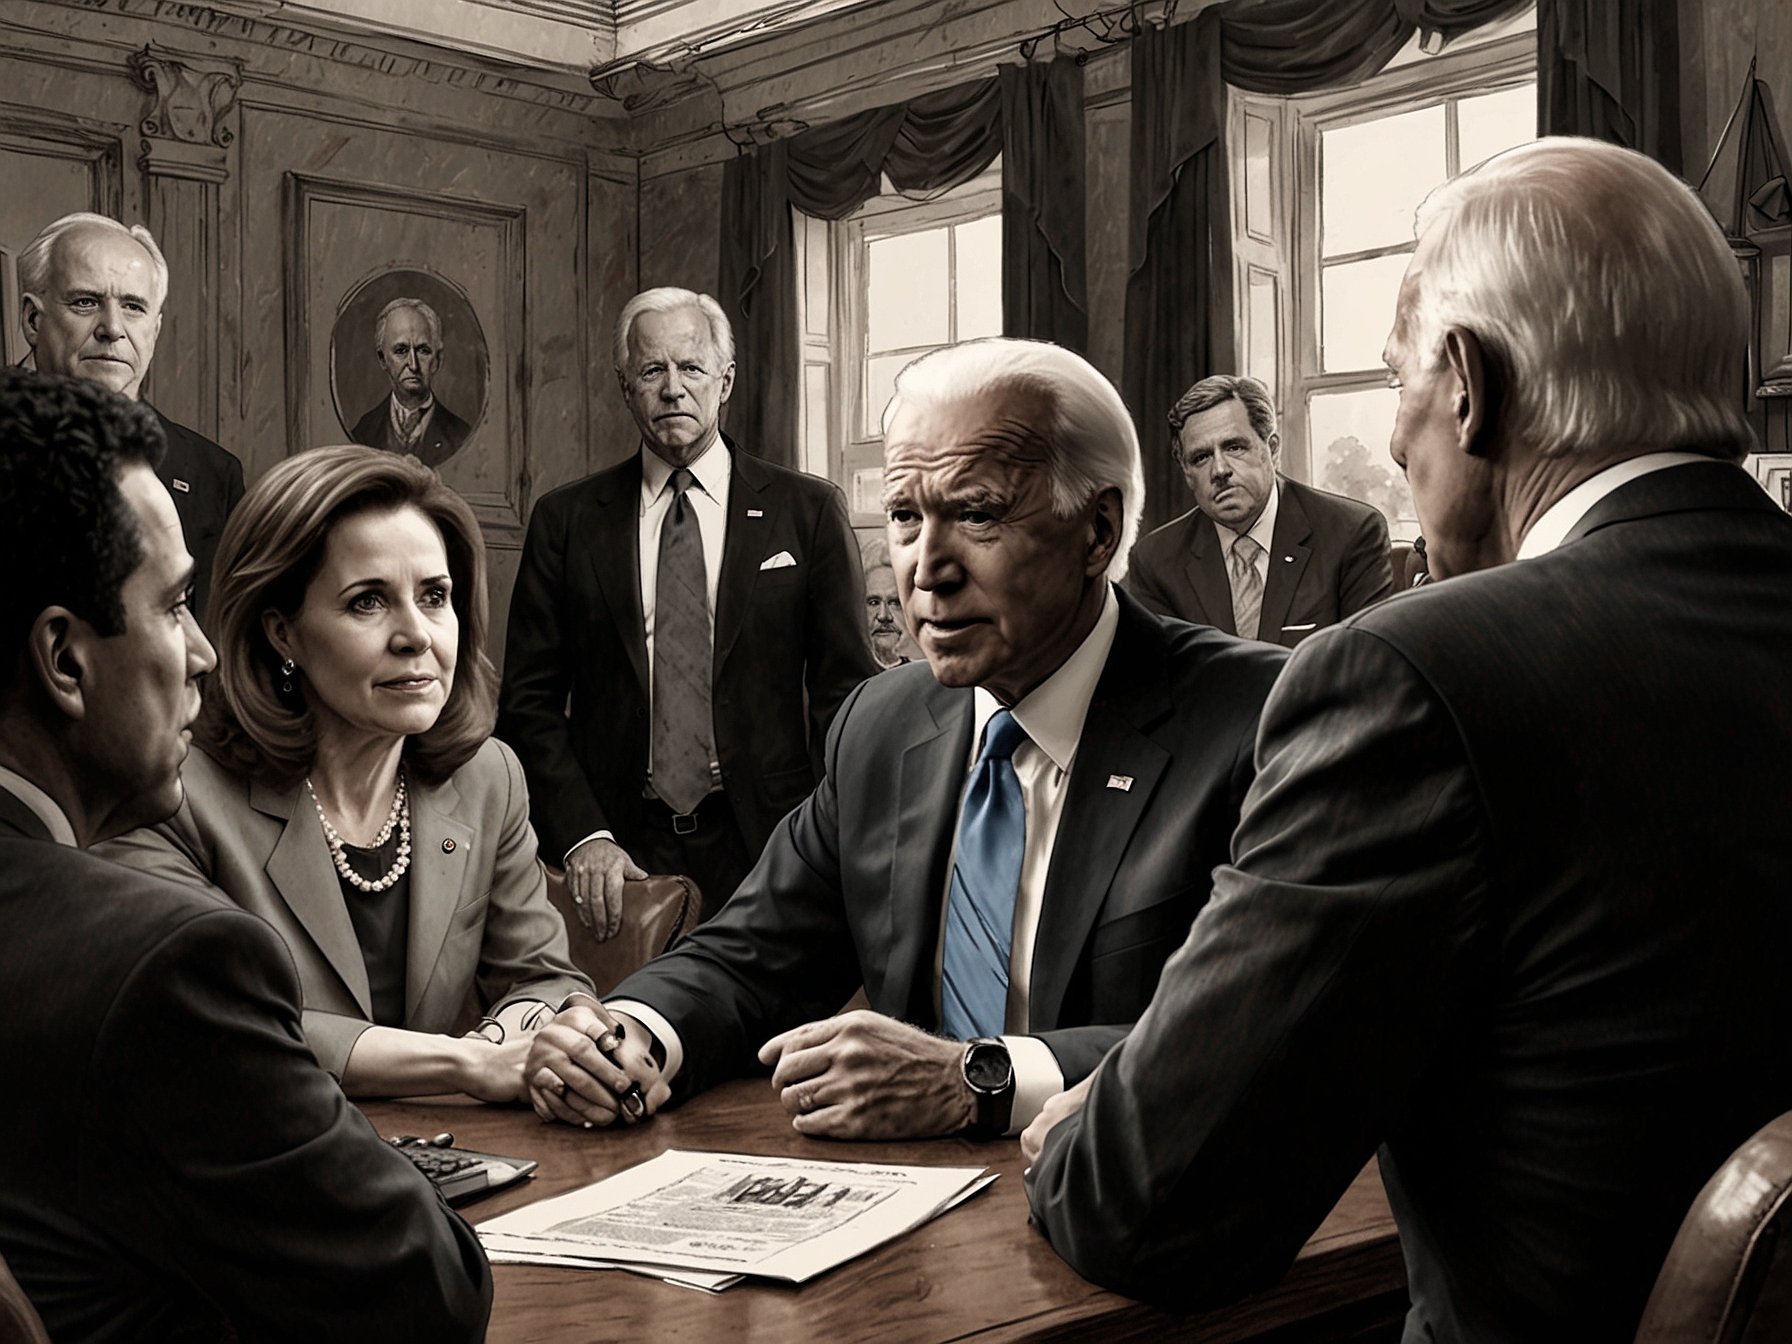 An intense Democratic Party meeting where high-ranking members are engaged in a heated discussion about potential strategies and measures to address Joe Biden's leadership performance.